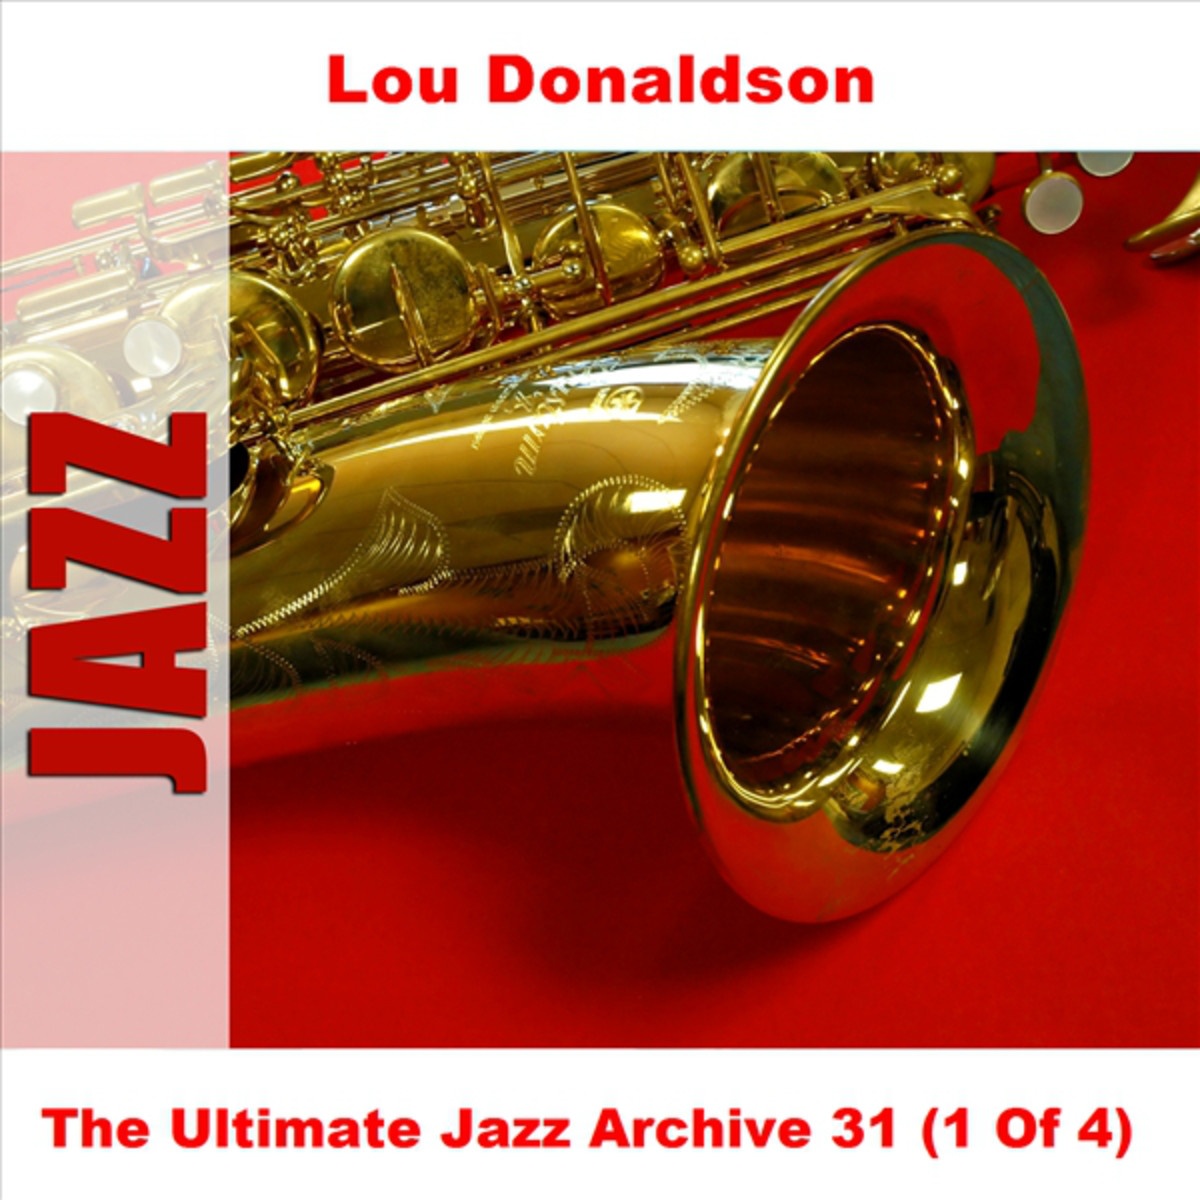 The Ultimate Jazz Archive 31 (1 Of 4)